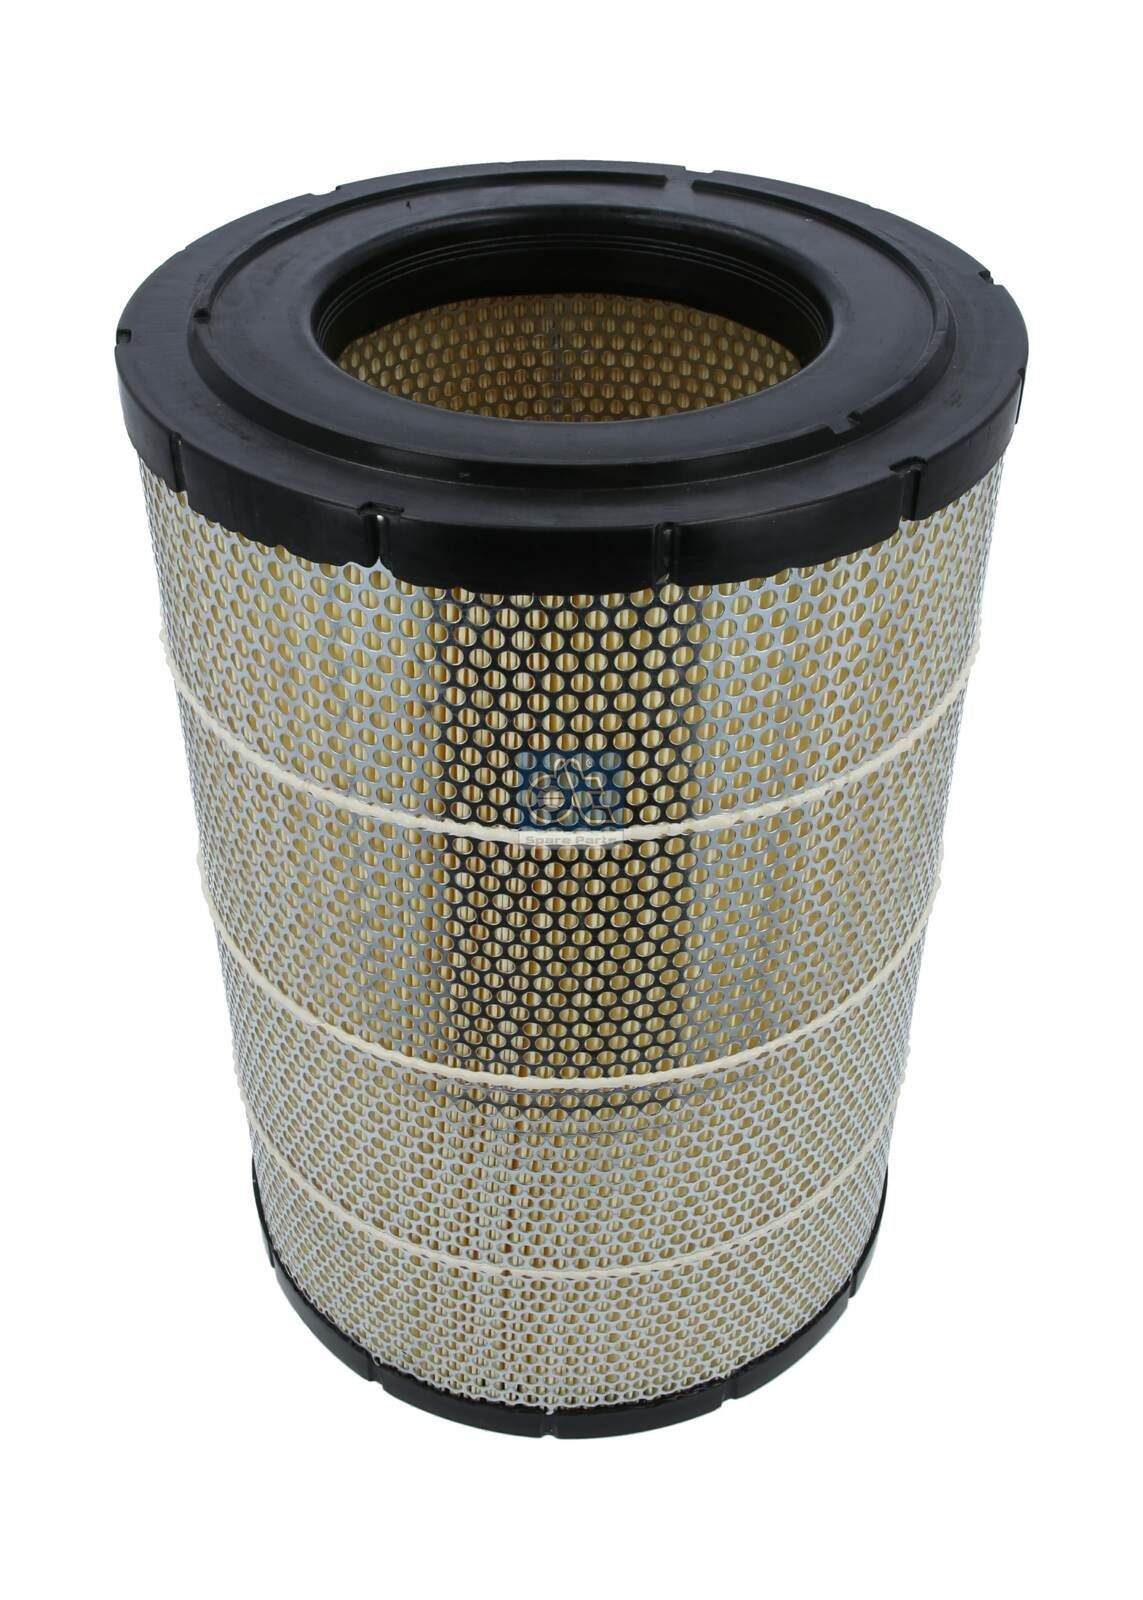 E1013L DT Spare Parts 445mm, 303mm, Filter Insert Height: 445mm Engine air filter 1.10926 buy